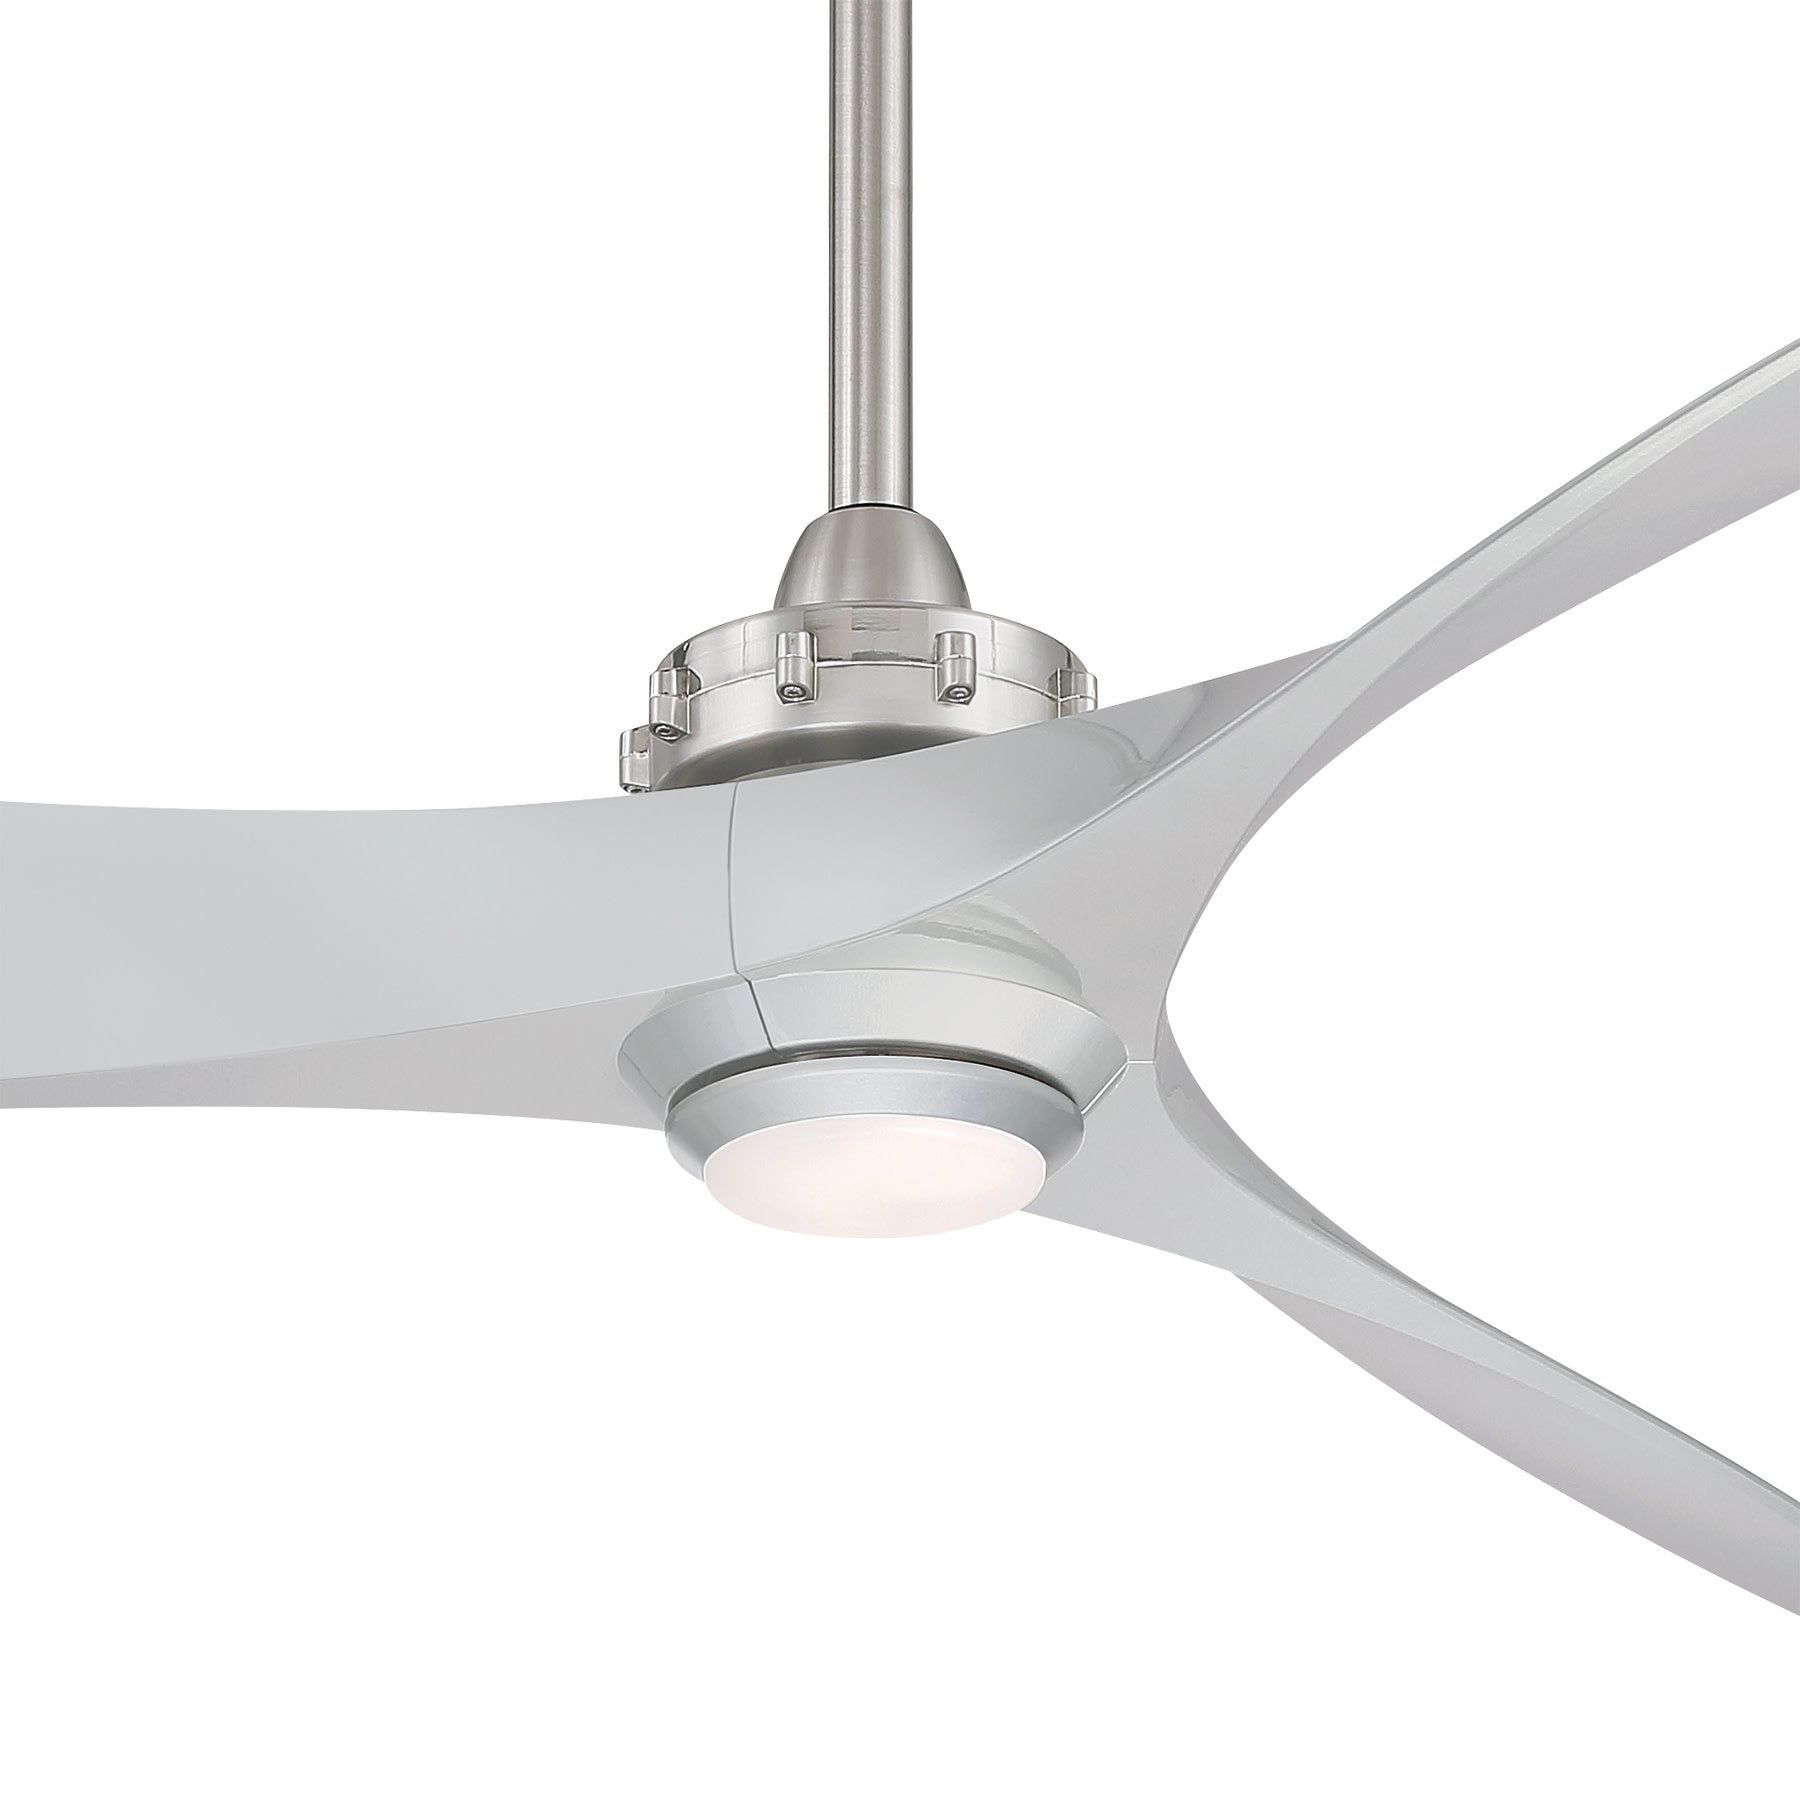 Trendy 60 Aviation 3 Blade Ceiling Fans Throughout Minkaaire Aviation Led 3 Blade 60" Aviation Led 3 Blade Indoor Ceiling Fan  With Remote Control And Blades Included (View 16 of 20)